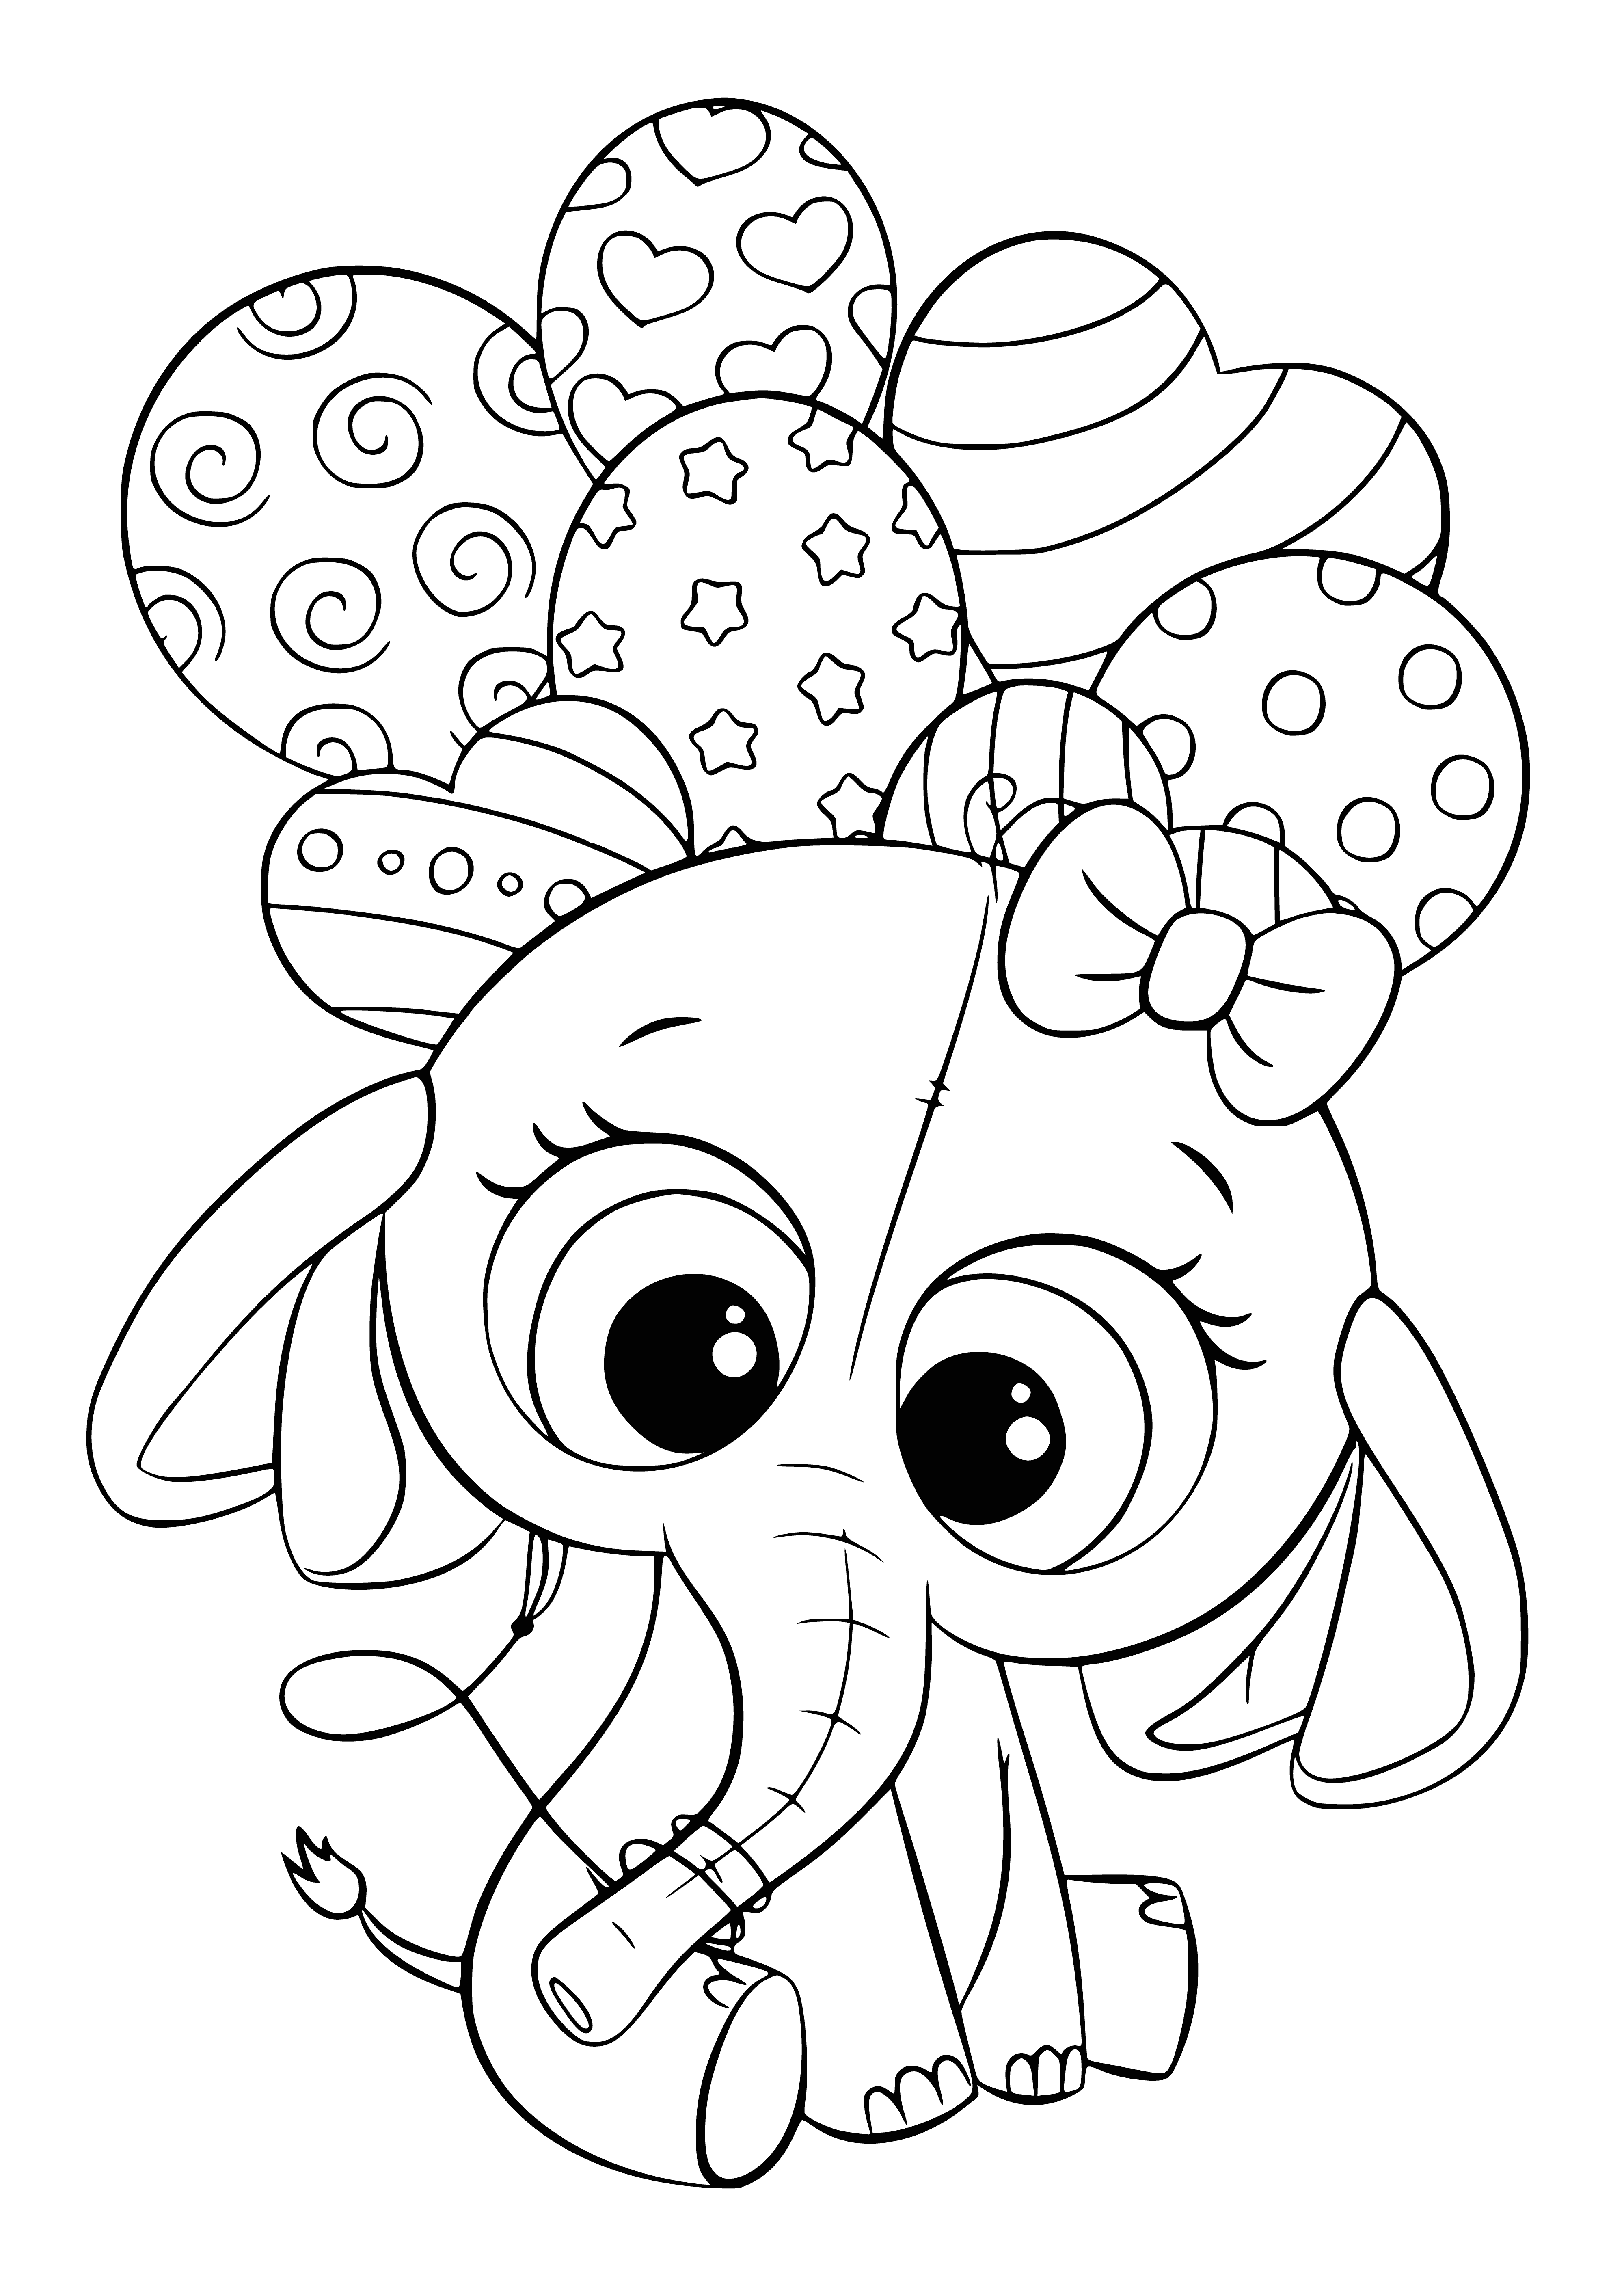 Baby elephant with balls coloring page